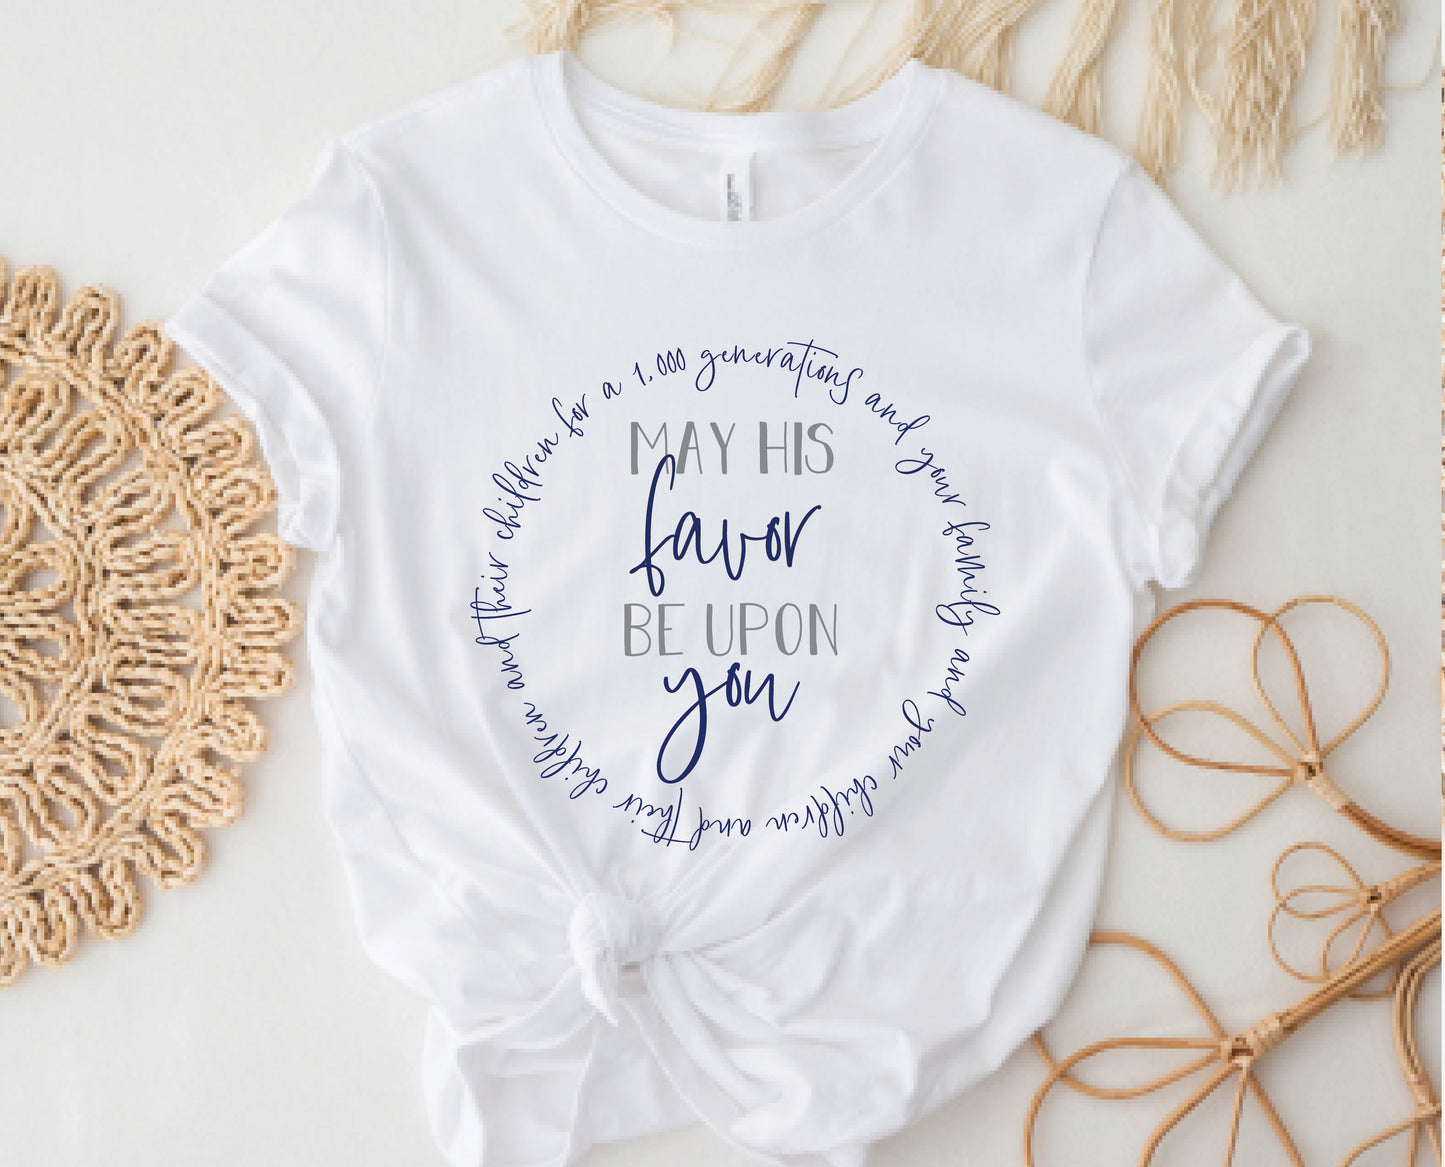 May His Favor Be Upon You for a thousand generations family & children Numbers 6 The Blessing Christian aesthetic circle design printed on soft white t-shirt for women